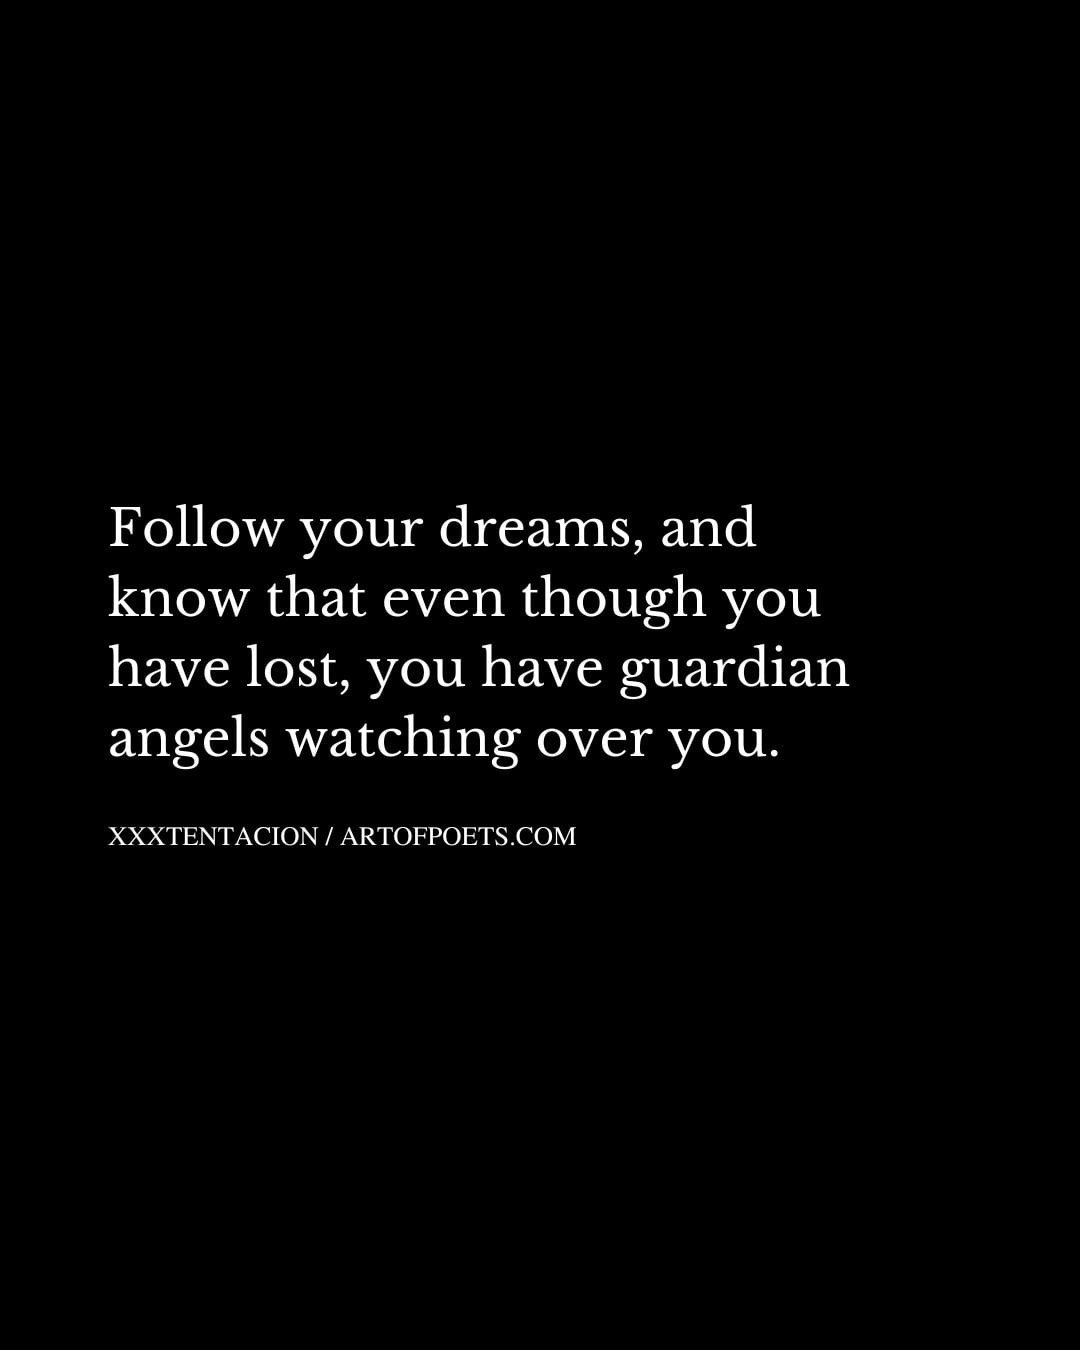 Follow your dreams and know that even though you have lost you have guardian angels watching over you